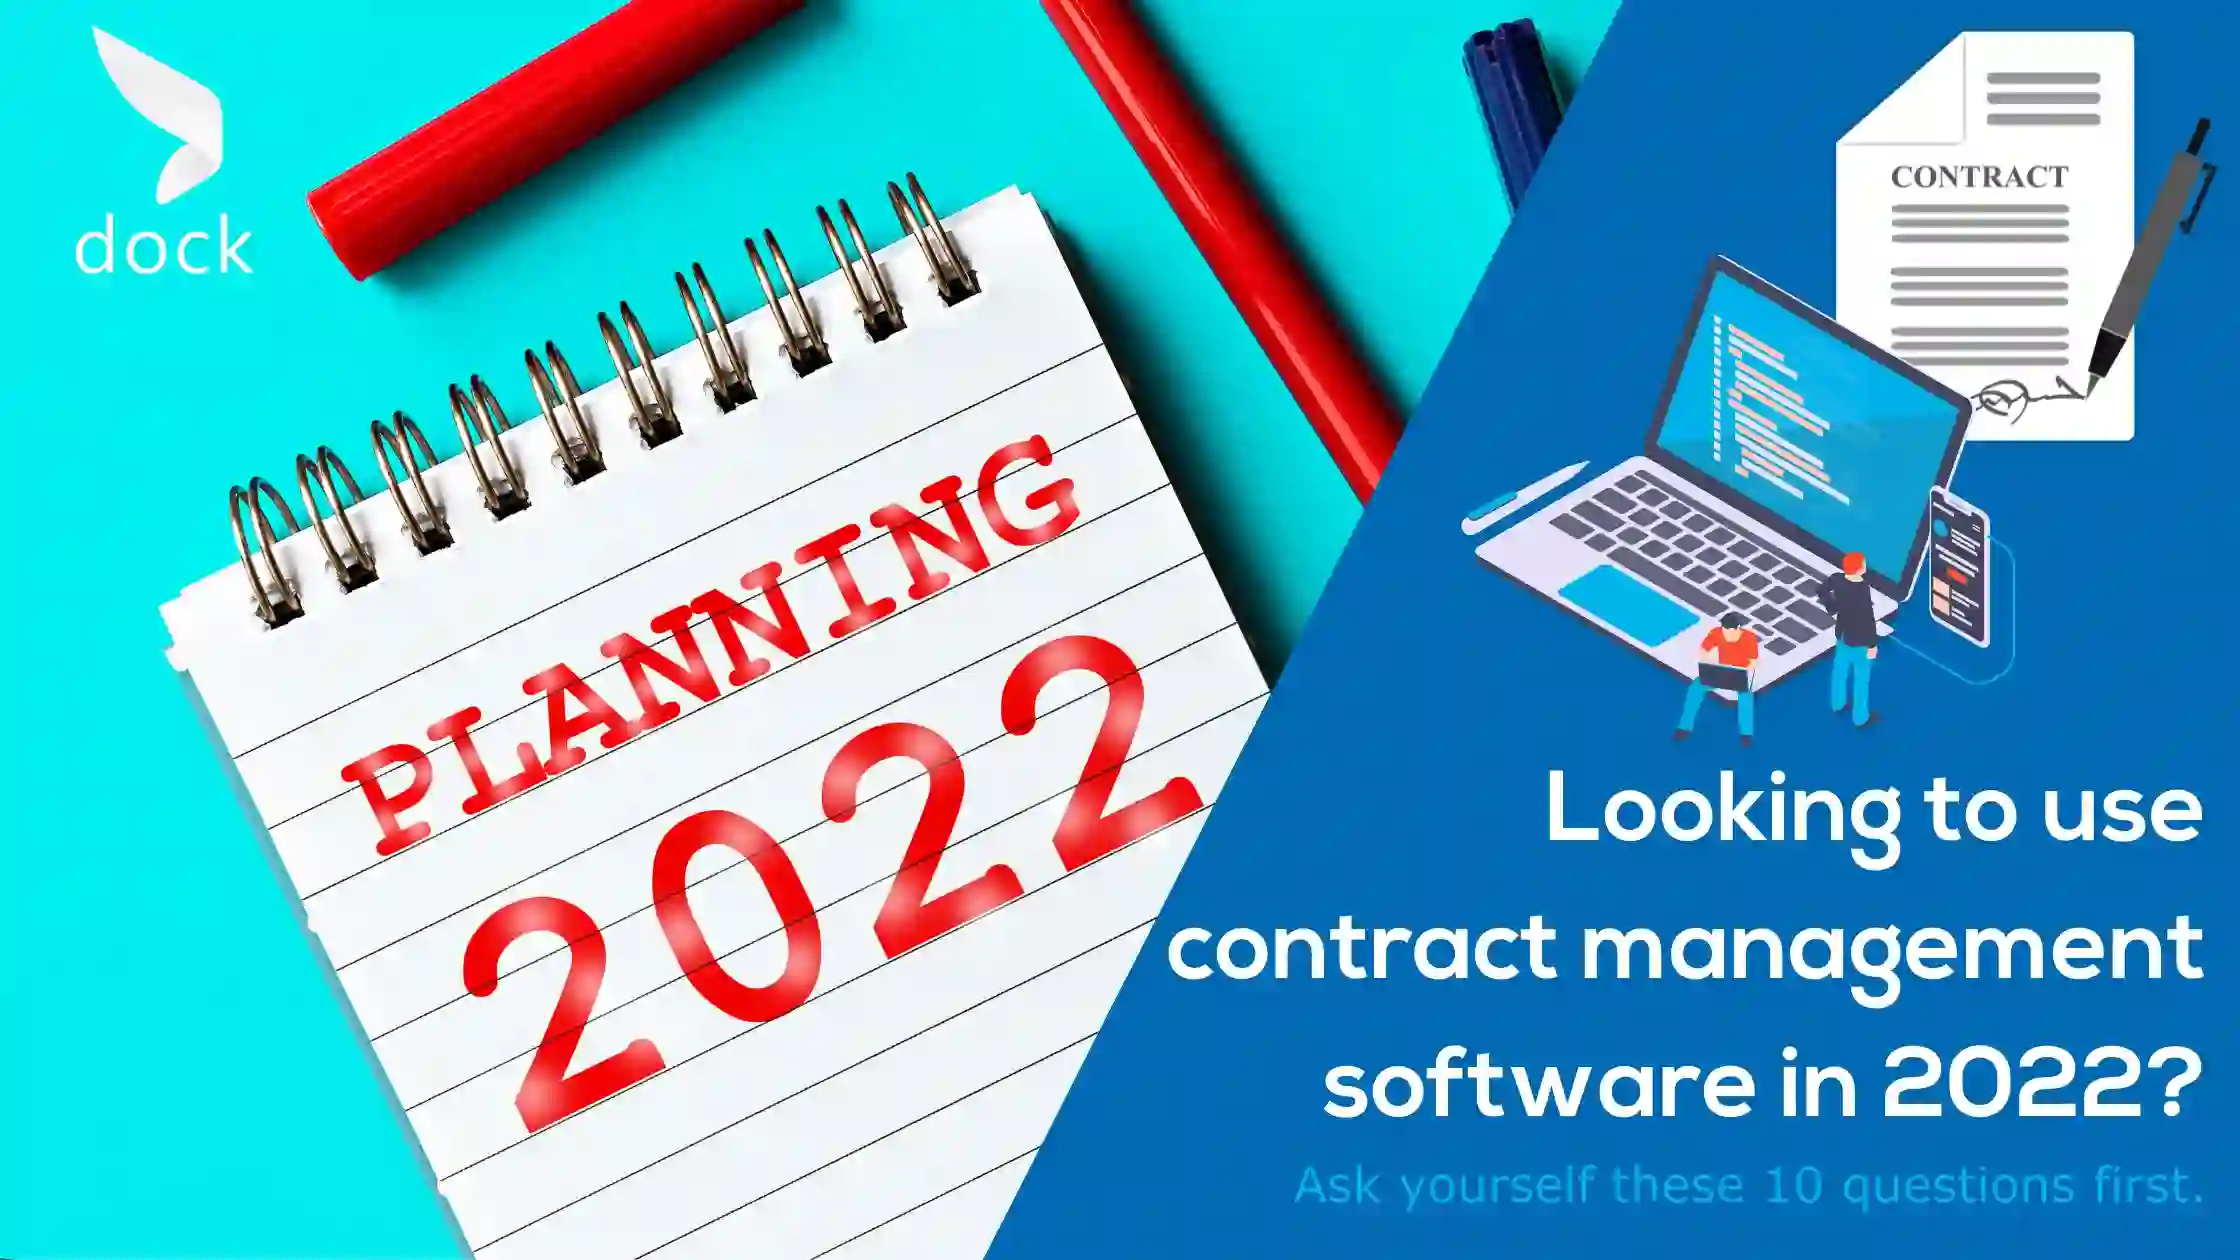 Looking to use contract management software in 2022.